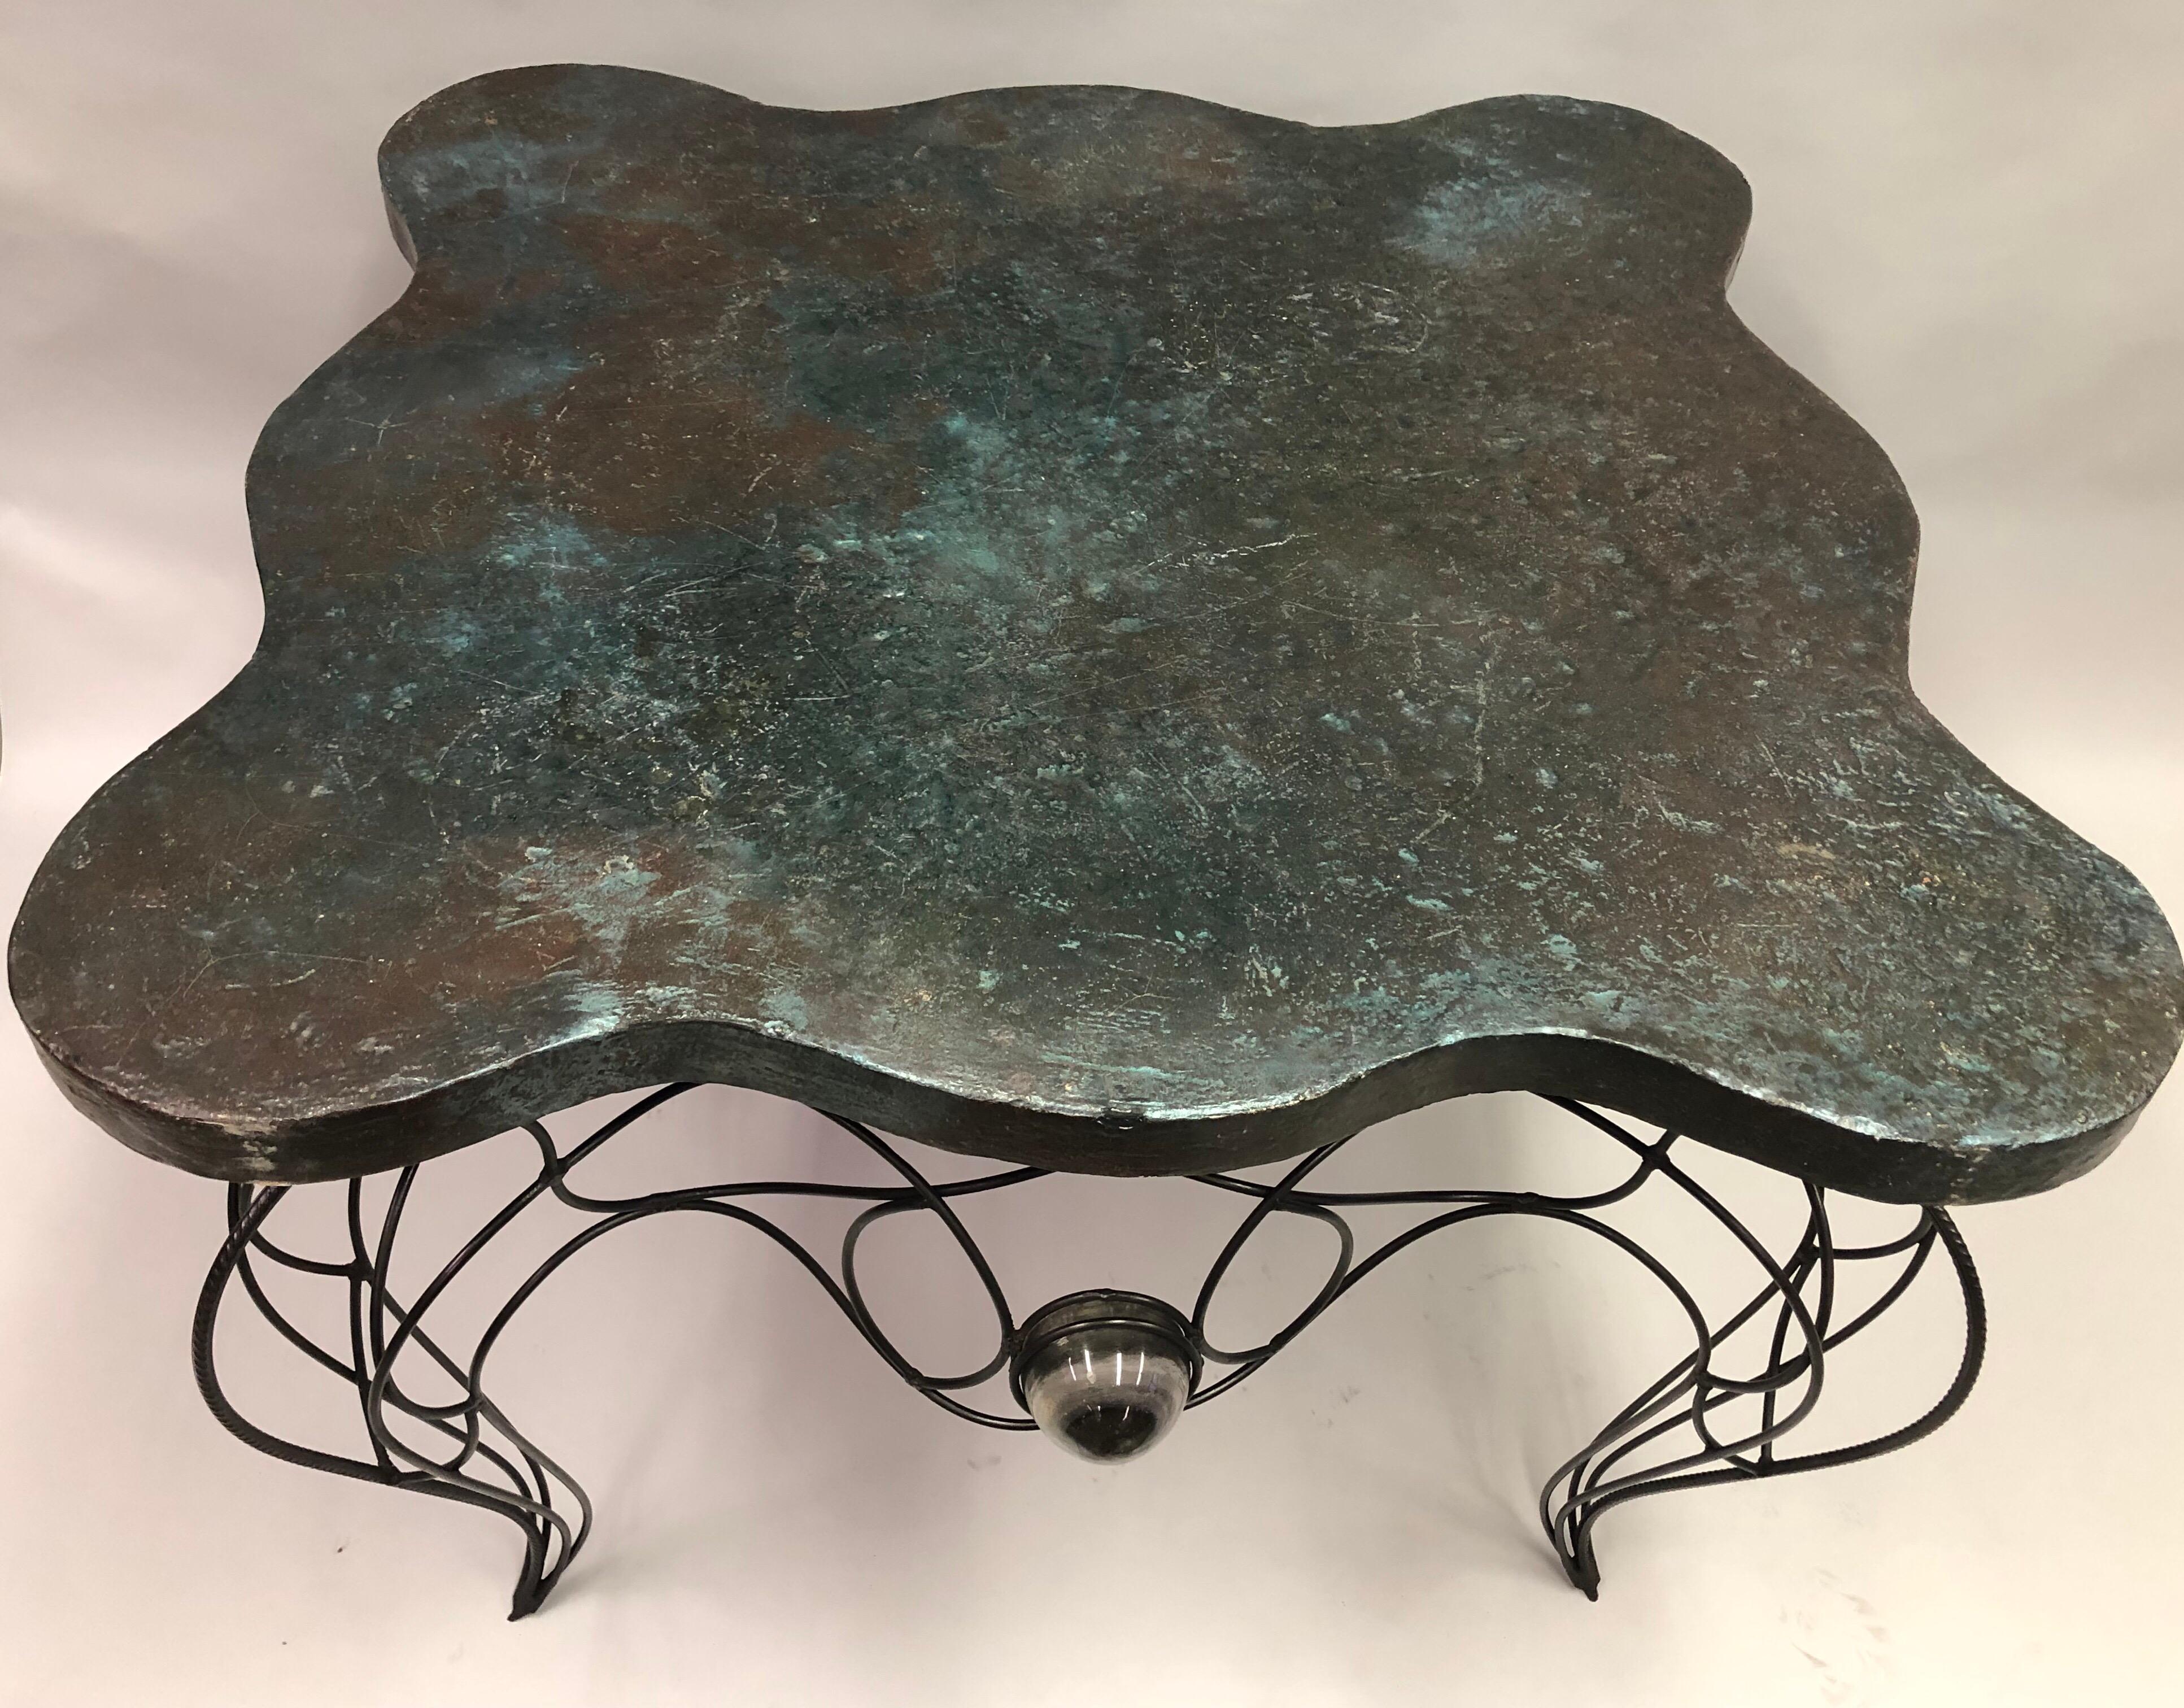 American Craftsman Unique Handwrought Iron & Crystal Center or Dining Table by Andre Dubreuil, 1986 For Sale